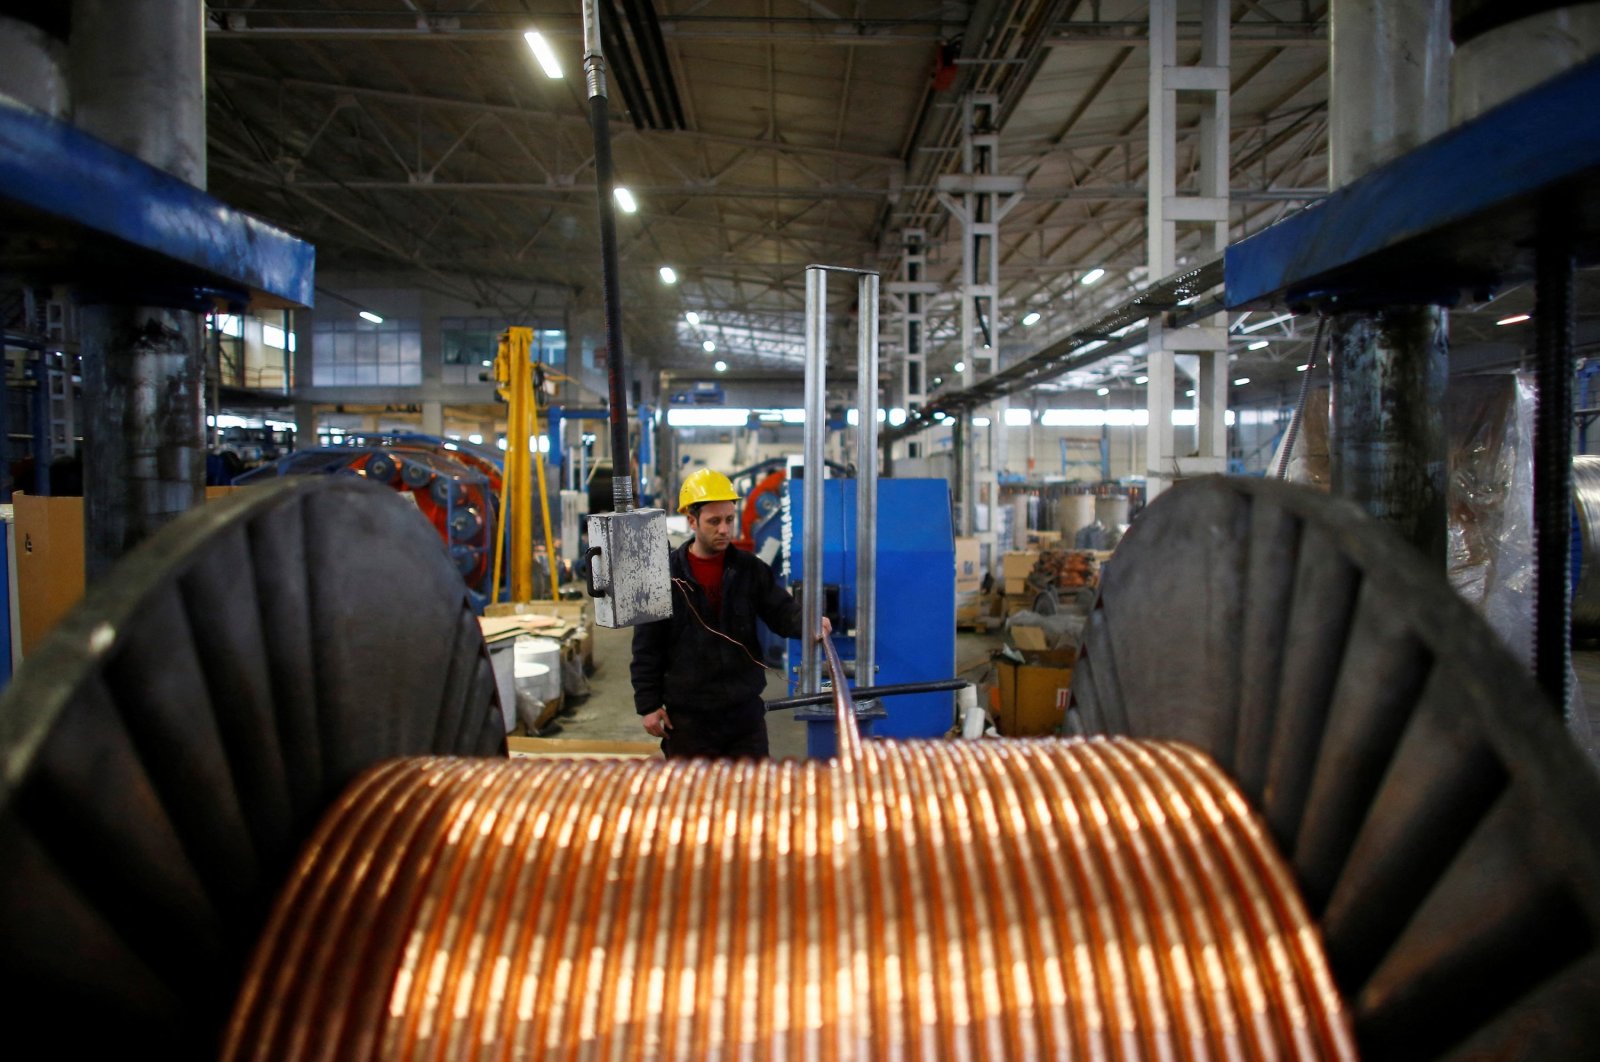 A worker checks copper cables being produced at a factory in the central Anatolian city of Kayseri, Türkiye, Feb. 12, 2015. (Reuters Photo)